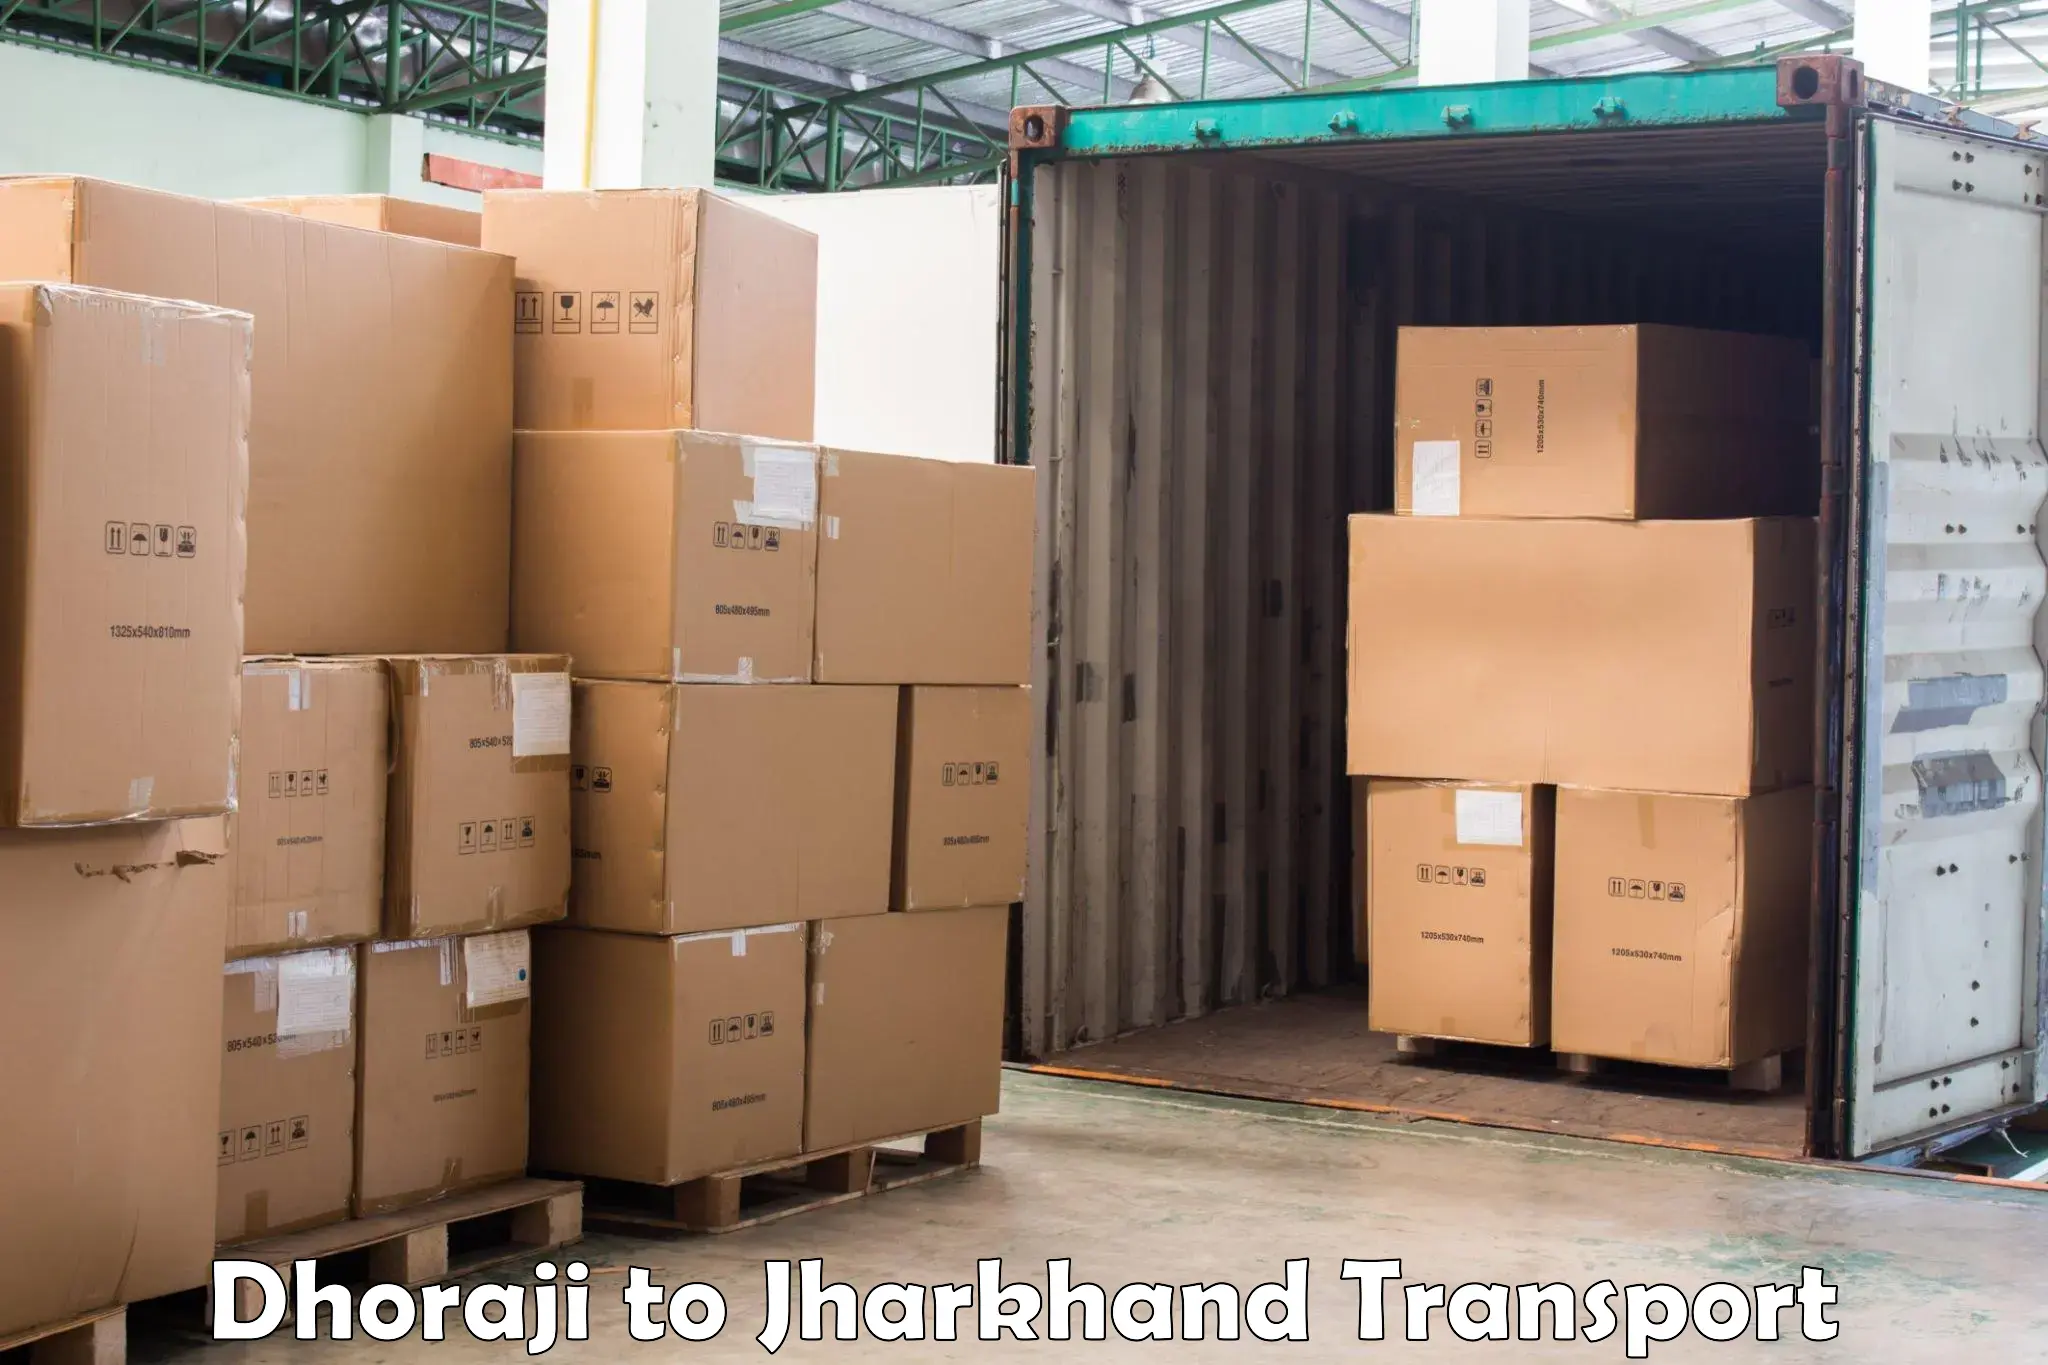 Pick up transport service in Dhoraji to Jharkhand